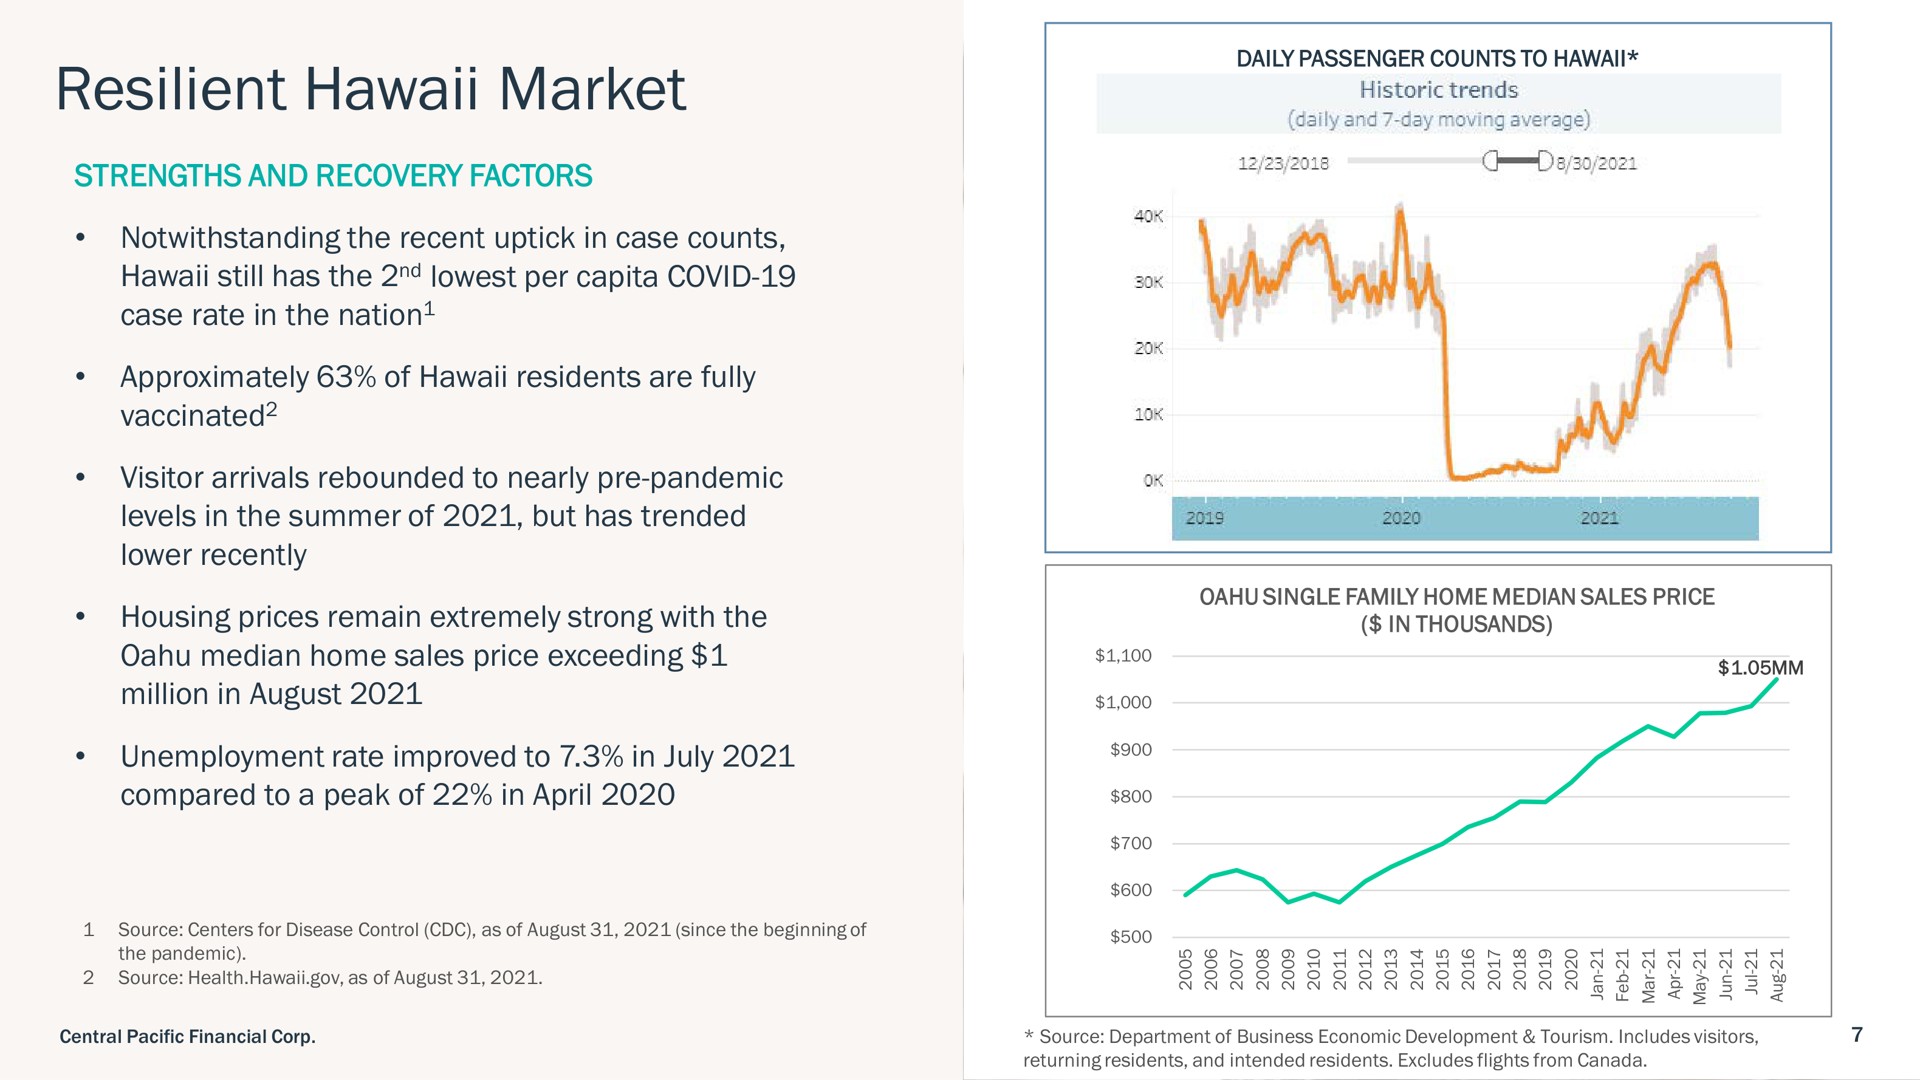 resilient market historic trends | Central Pacific Financial